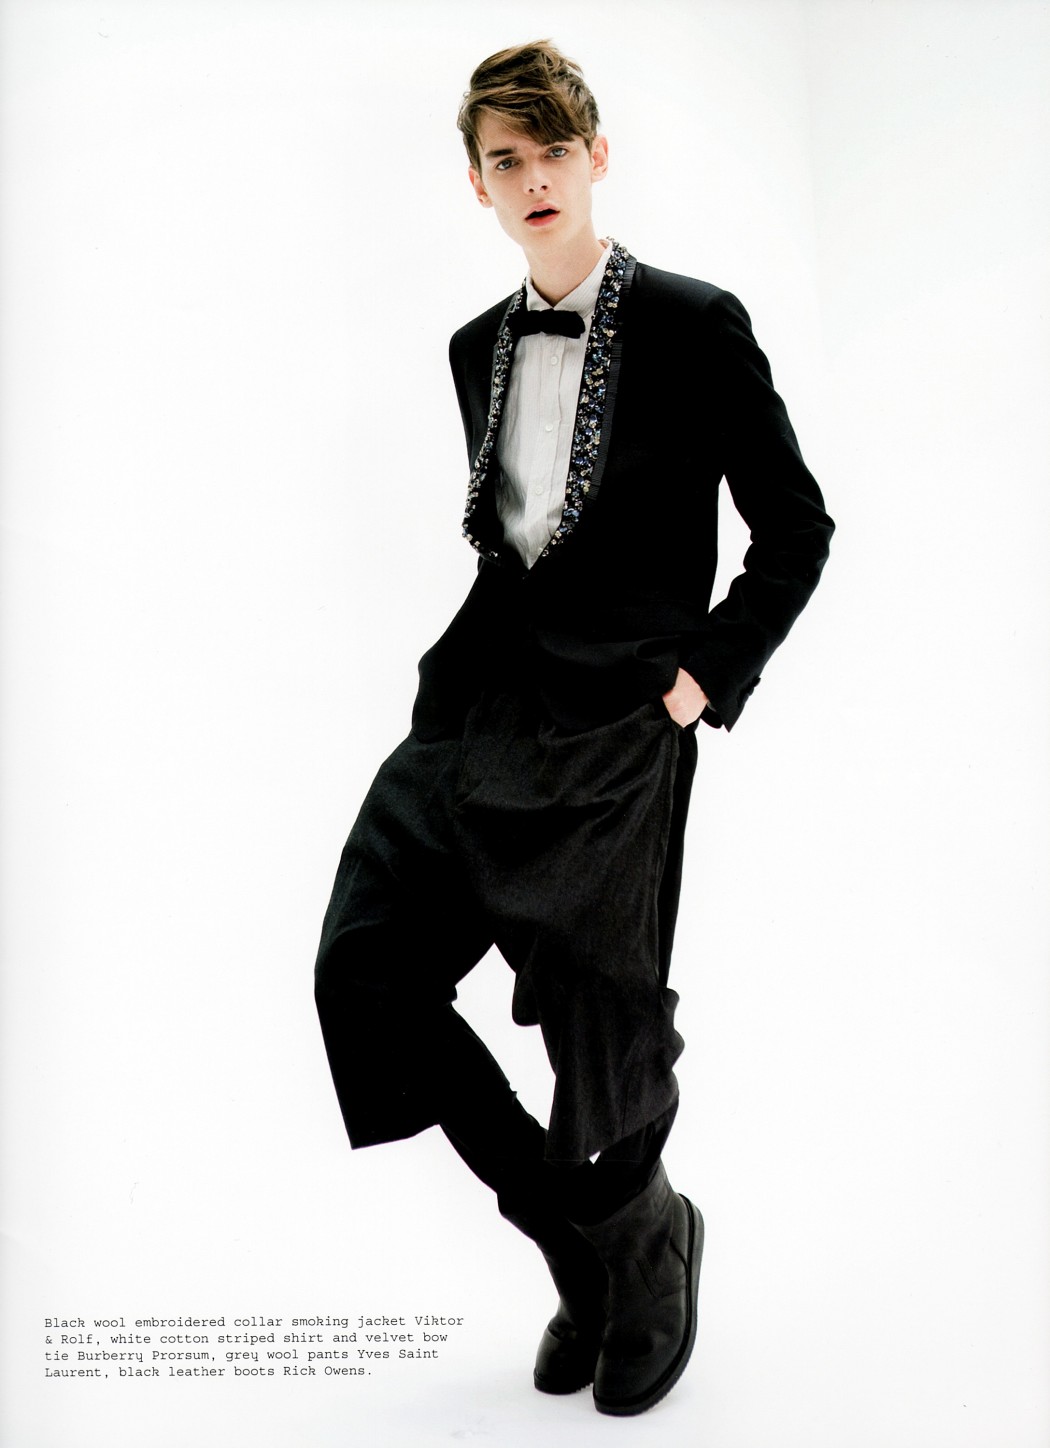 Douglas Neitzke & Keith Browning Rock Rebellious Formal Styles for ...